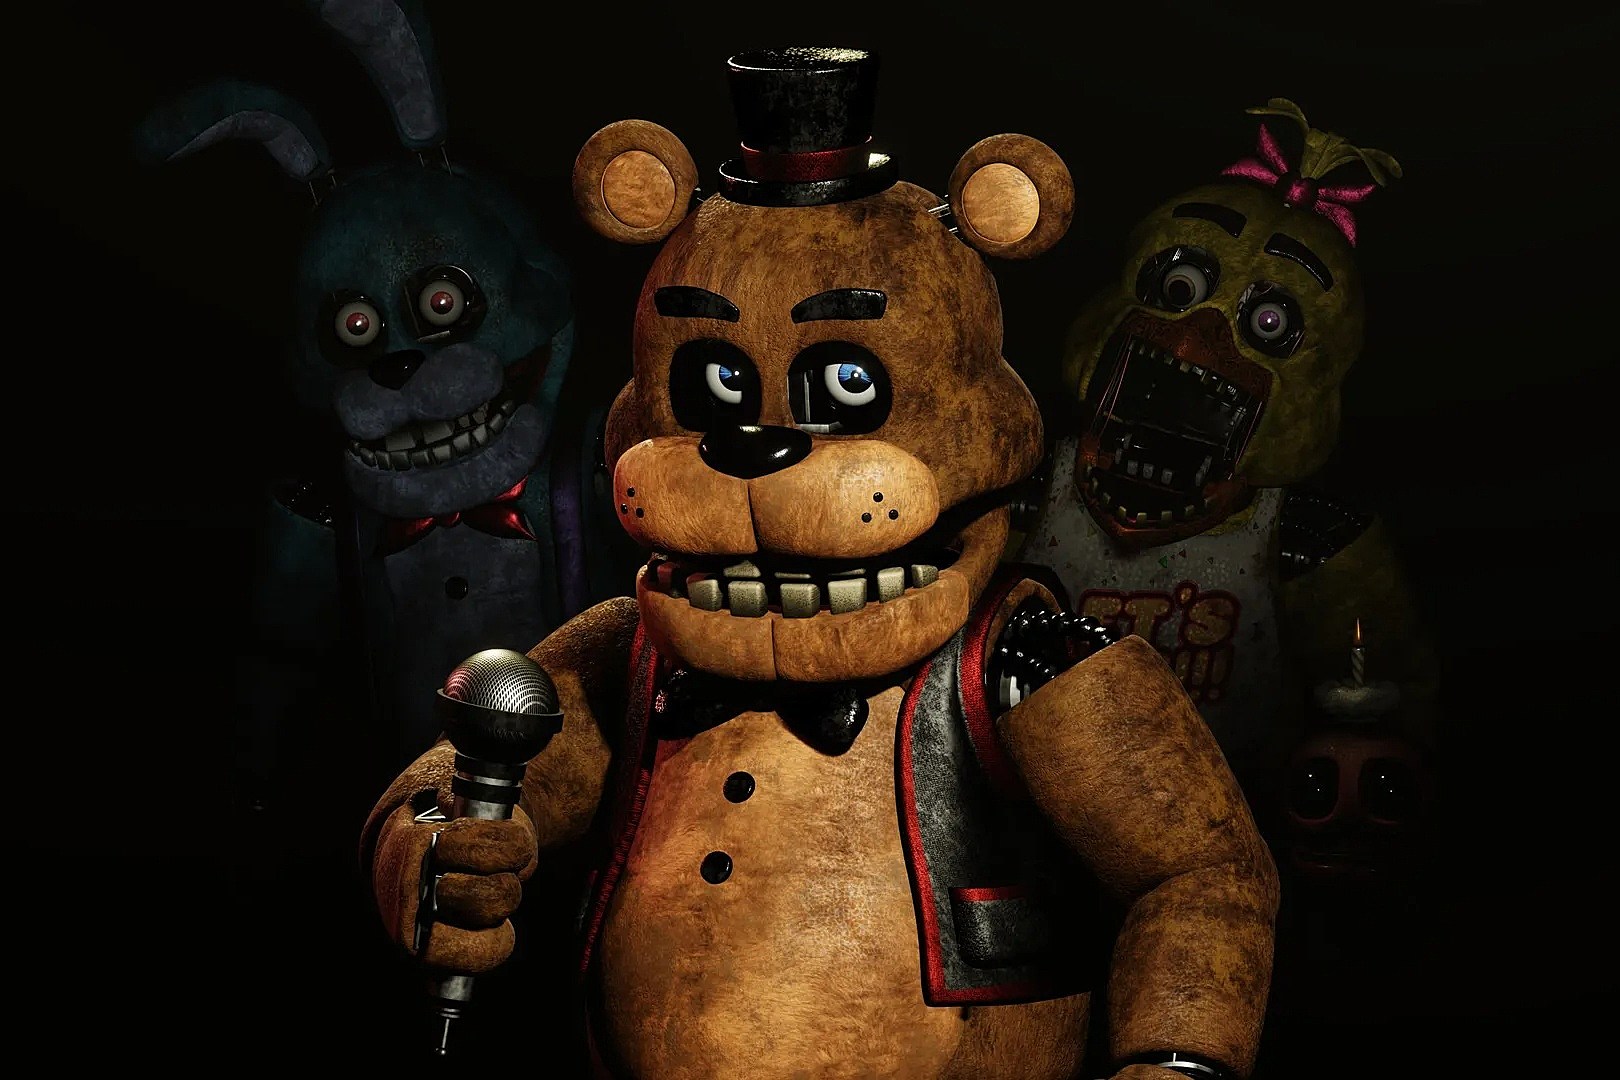 Five Nights At Freddy's' Breaks Record For Most-Watched Title On Peacock In  First 5 Days